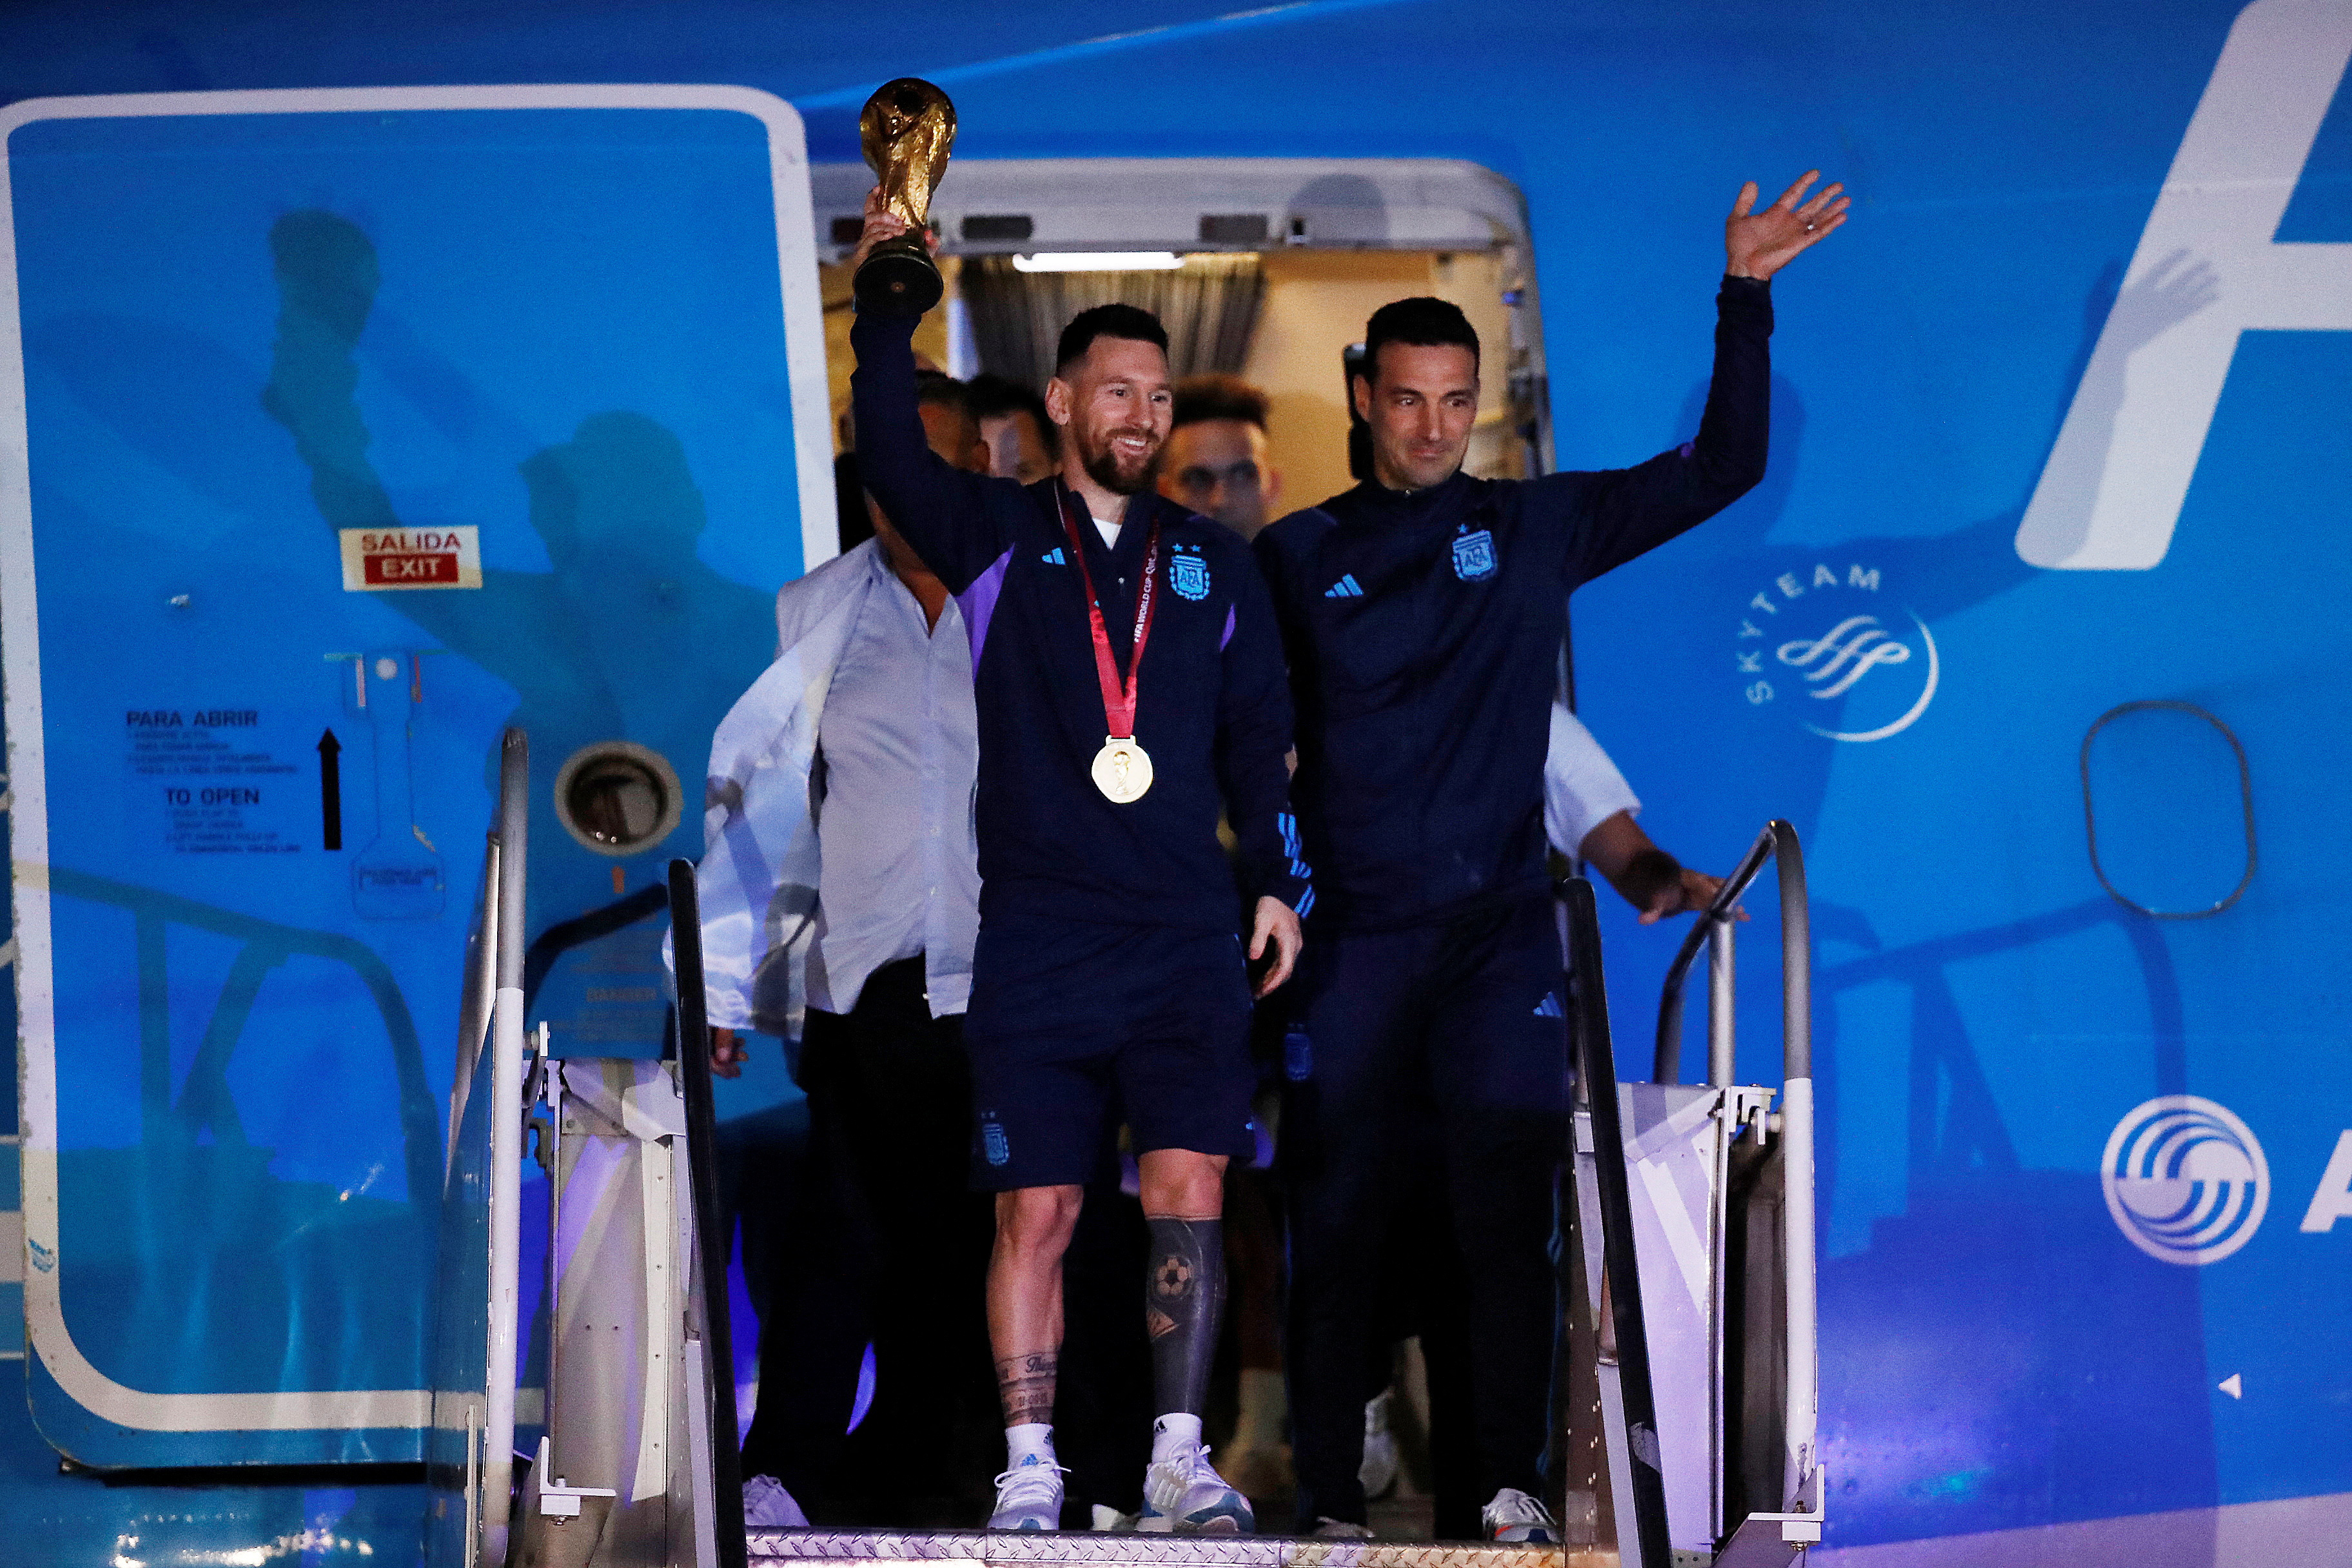 Argentina team arrives to Buenos Aires after winning the World Cup